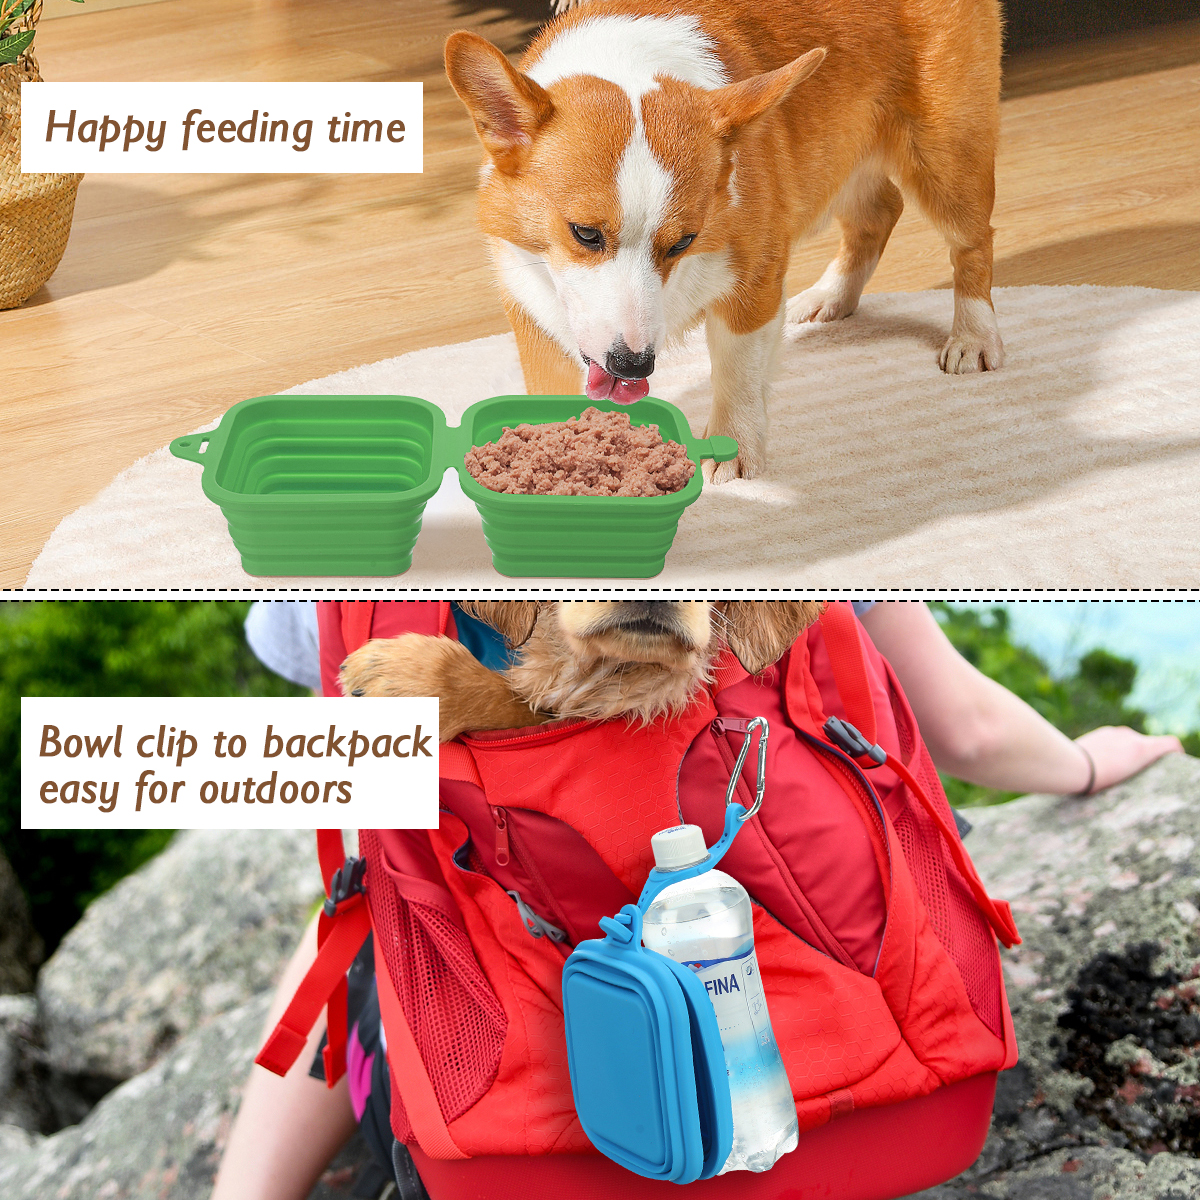 Pet-Folding-Bowl-Dog-Supplies-Cat-Puppy-Foldable-Carry-Travel-Feeder-Drinking-1957225-2